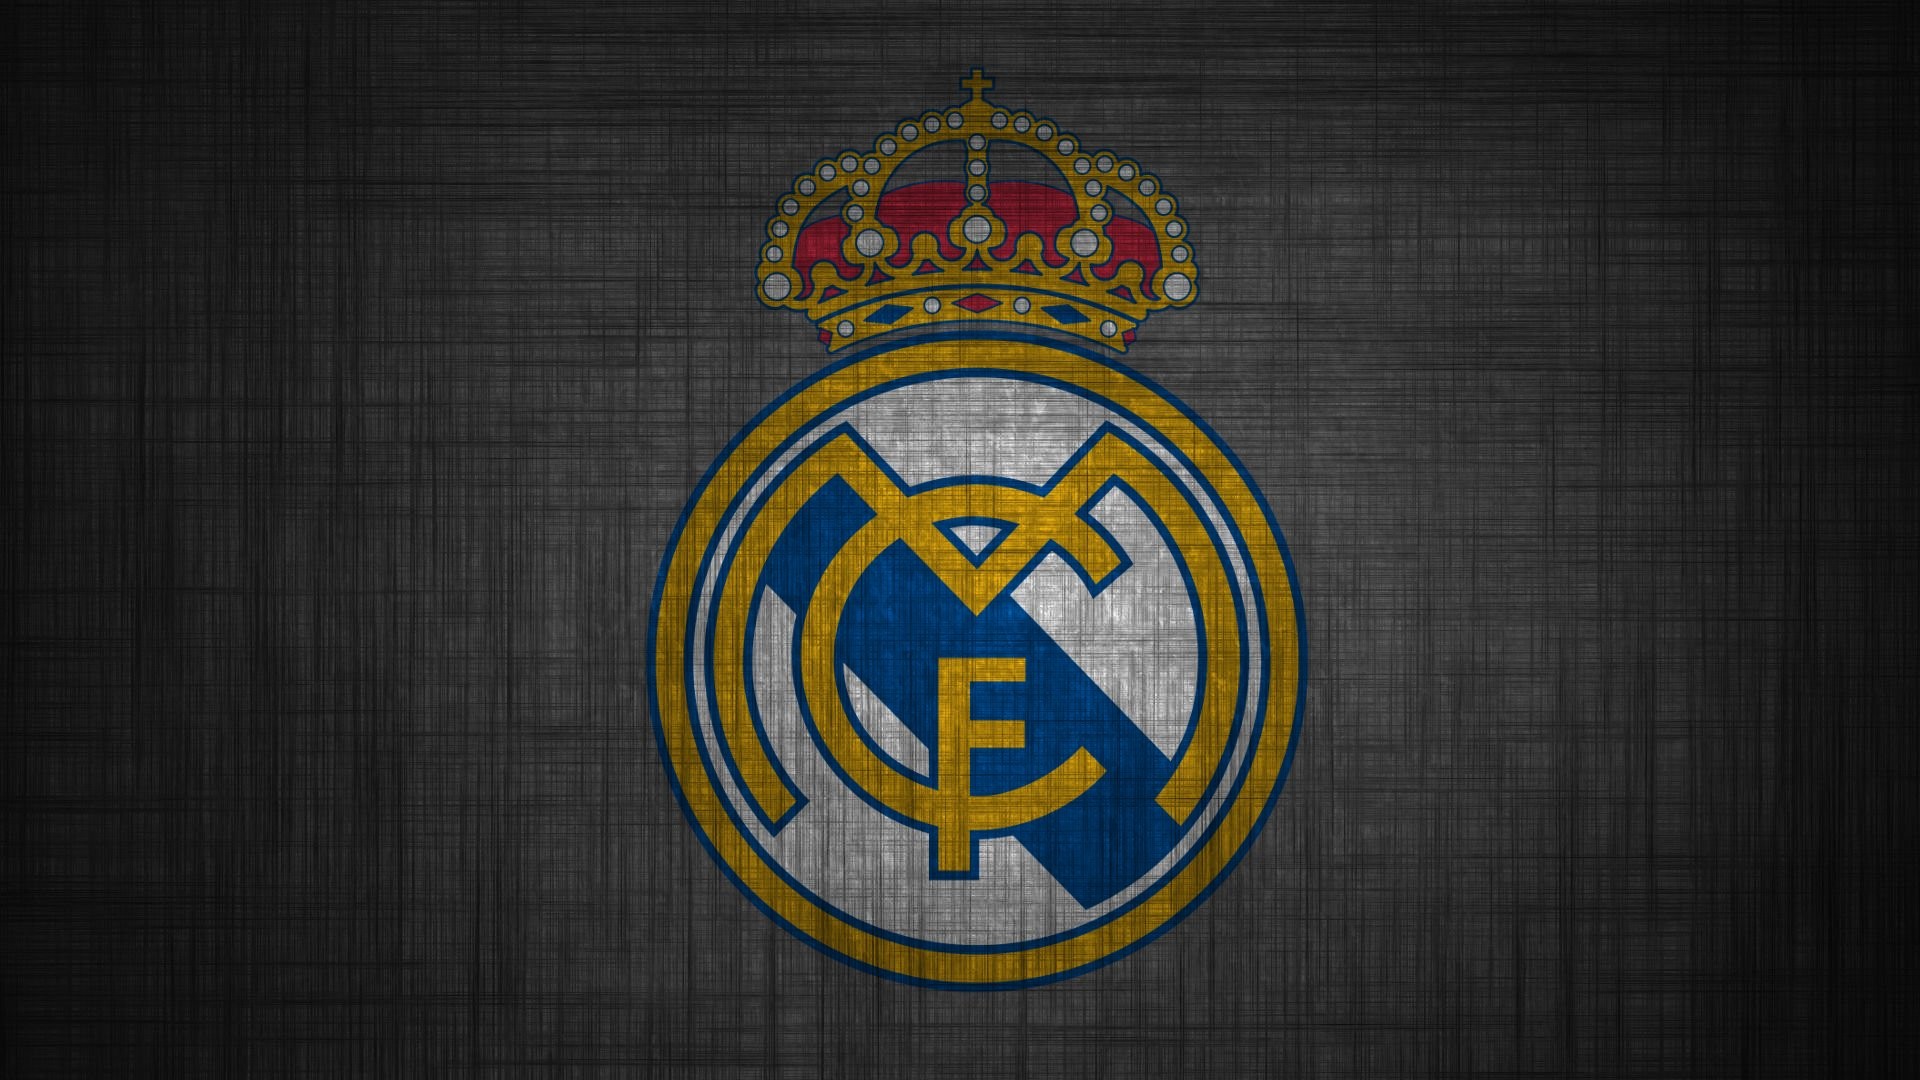 HD Real Madrid CF Backgrounds With Resolution 1920X1080 pixel. You can make this wallpaper for your Mac or Windows Desktop Background, iPhone, Android or Tablet and another Smartphone device for free